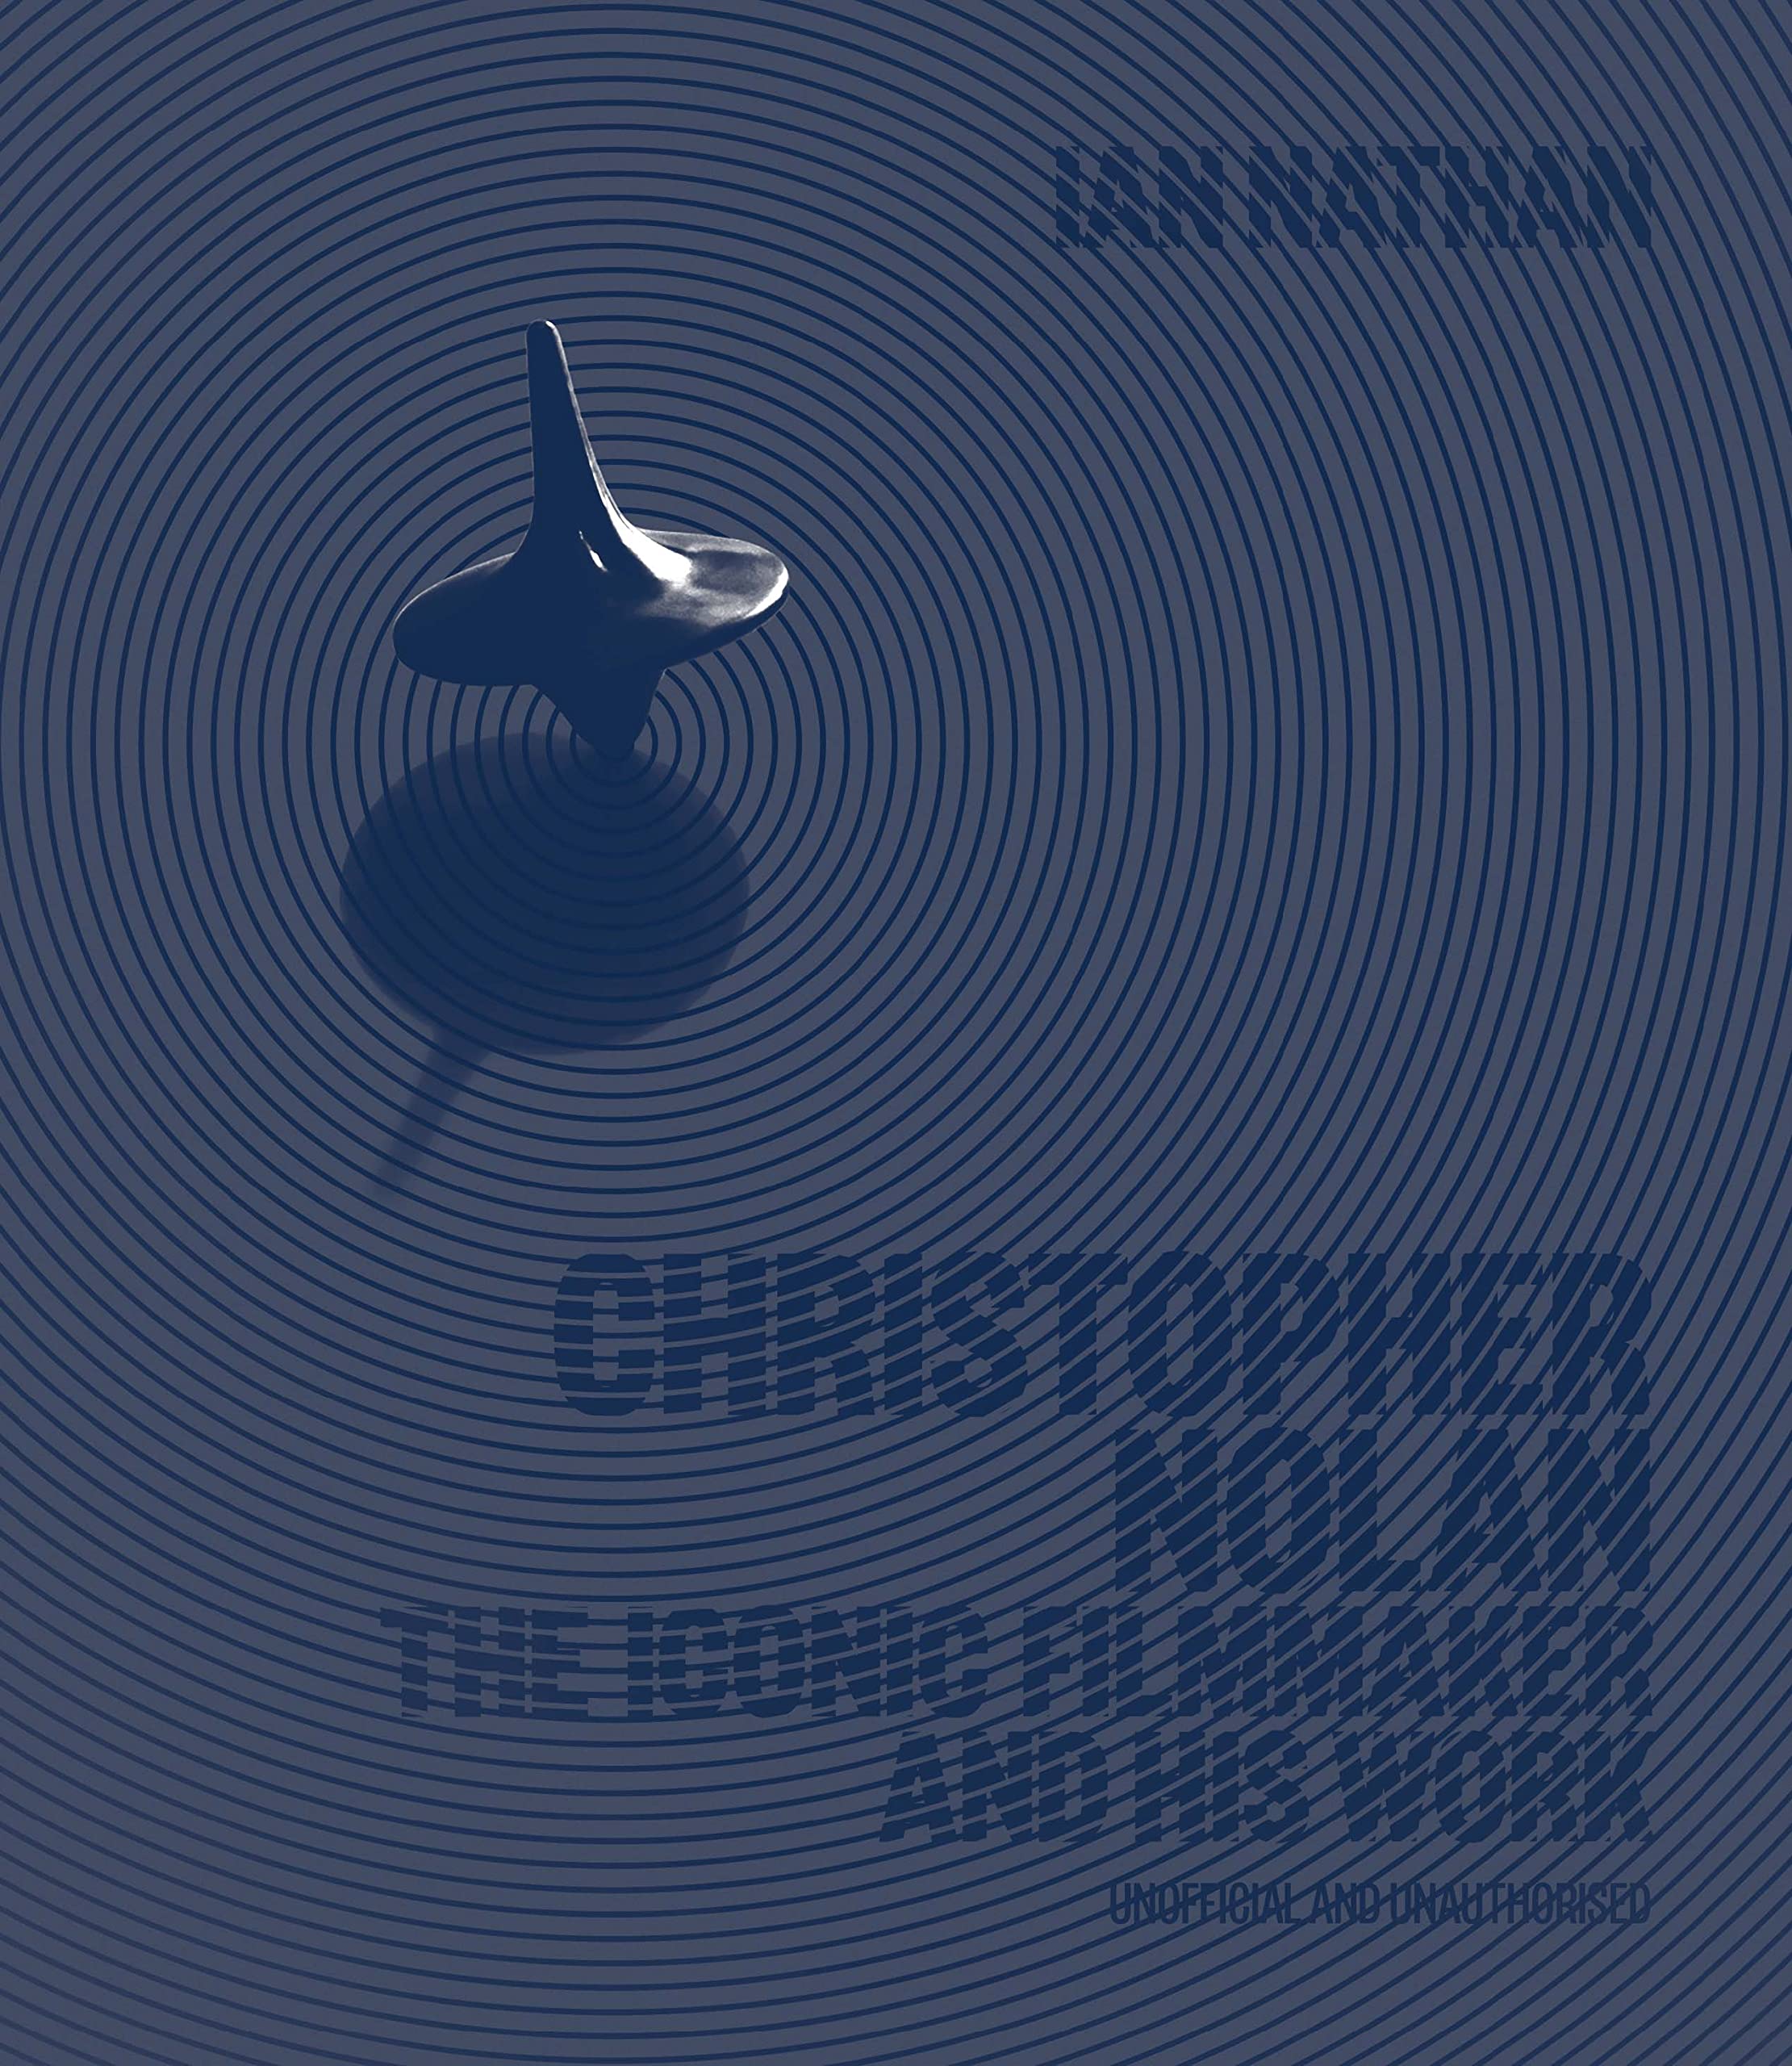 Christopher Nolan: The Iconic Filmmaker and His Work - Epub + Converted Pdf